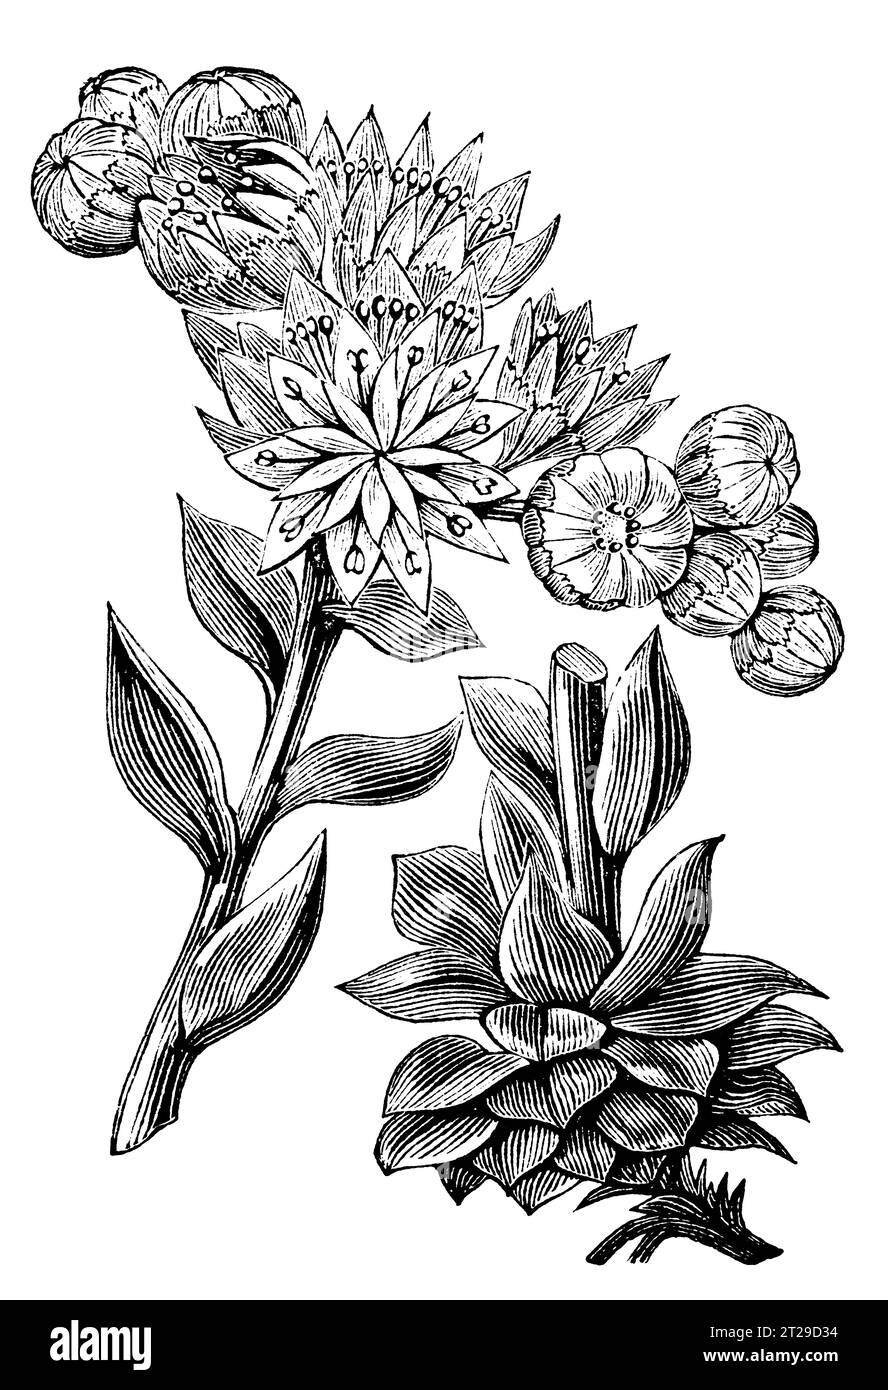 Sempervivum tectorum, digitally restored from 'The Condensed American Encyclopedia' published in 1882. Stock Photo